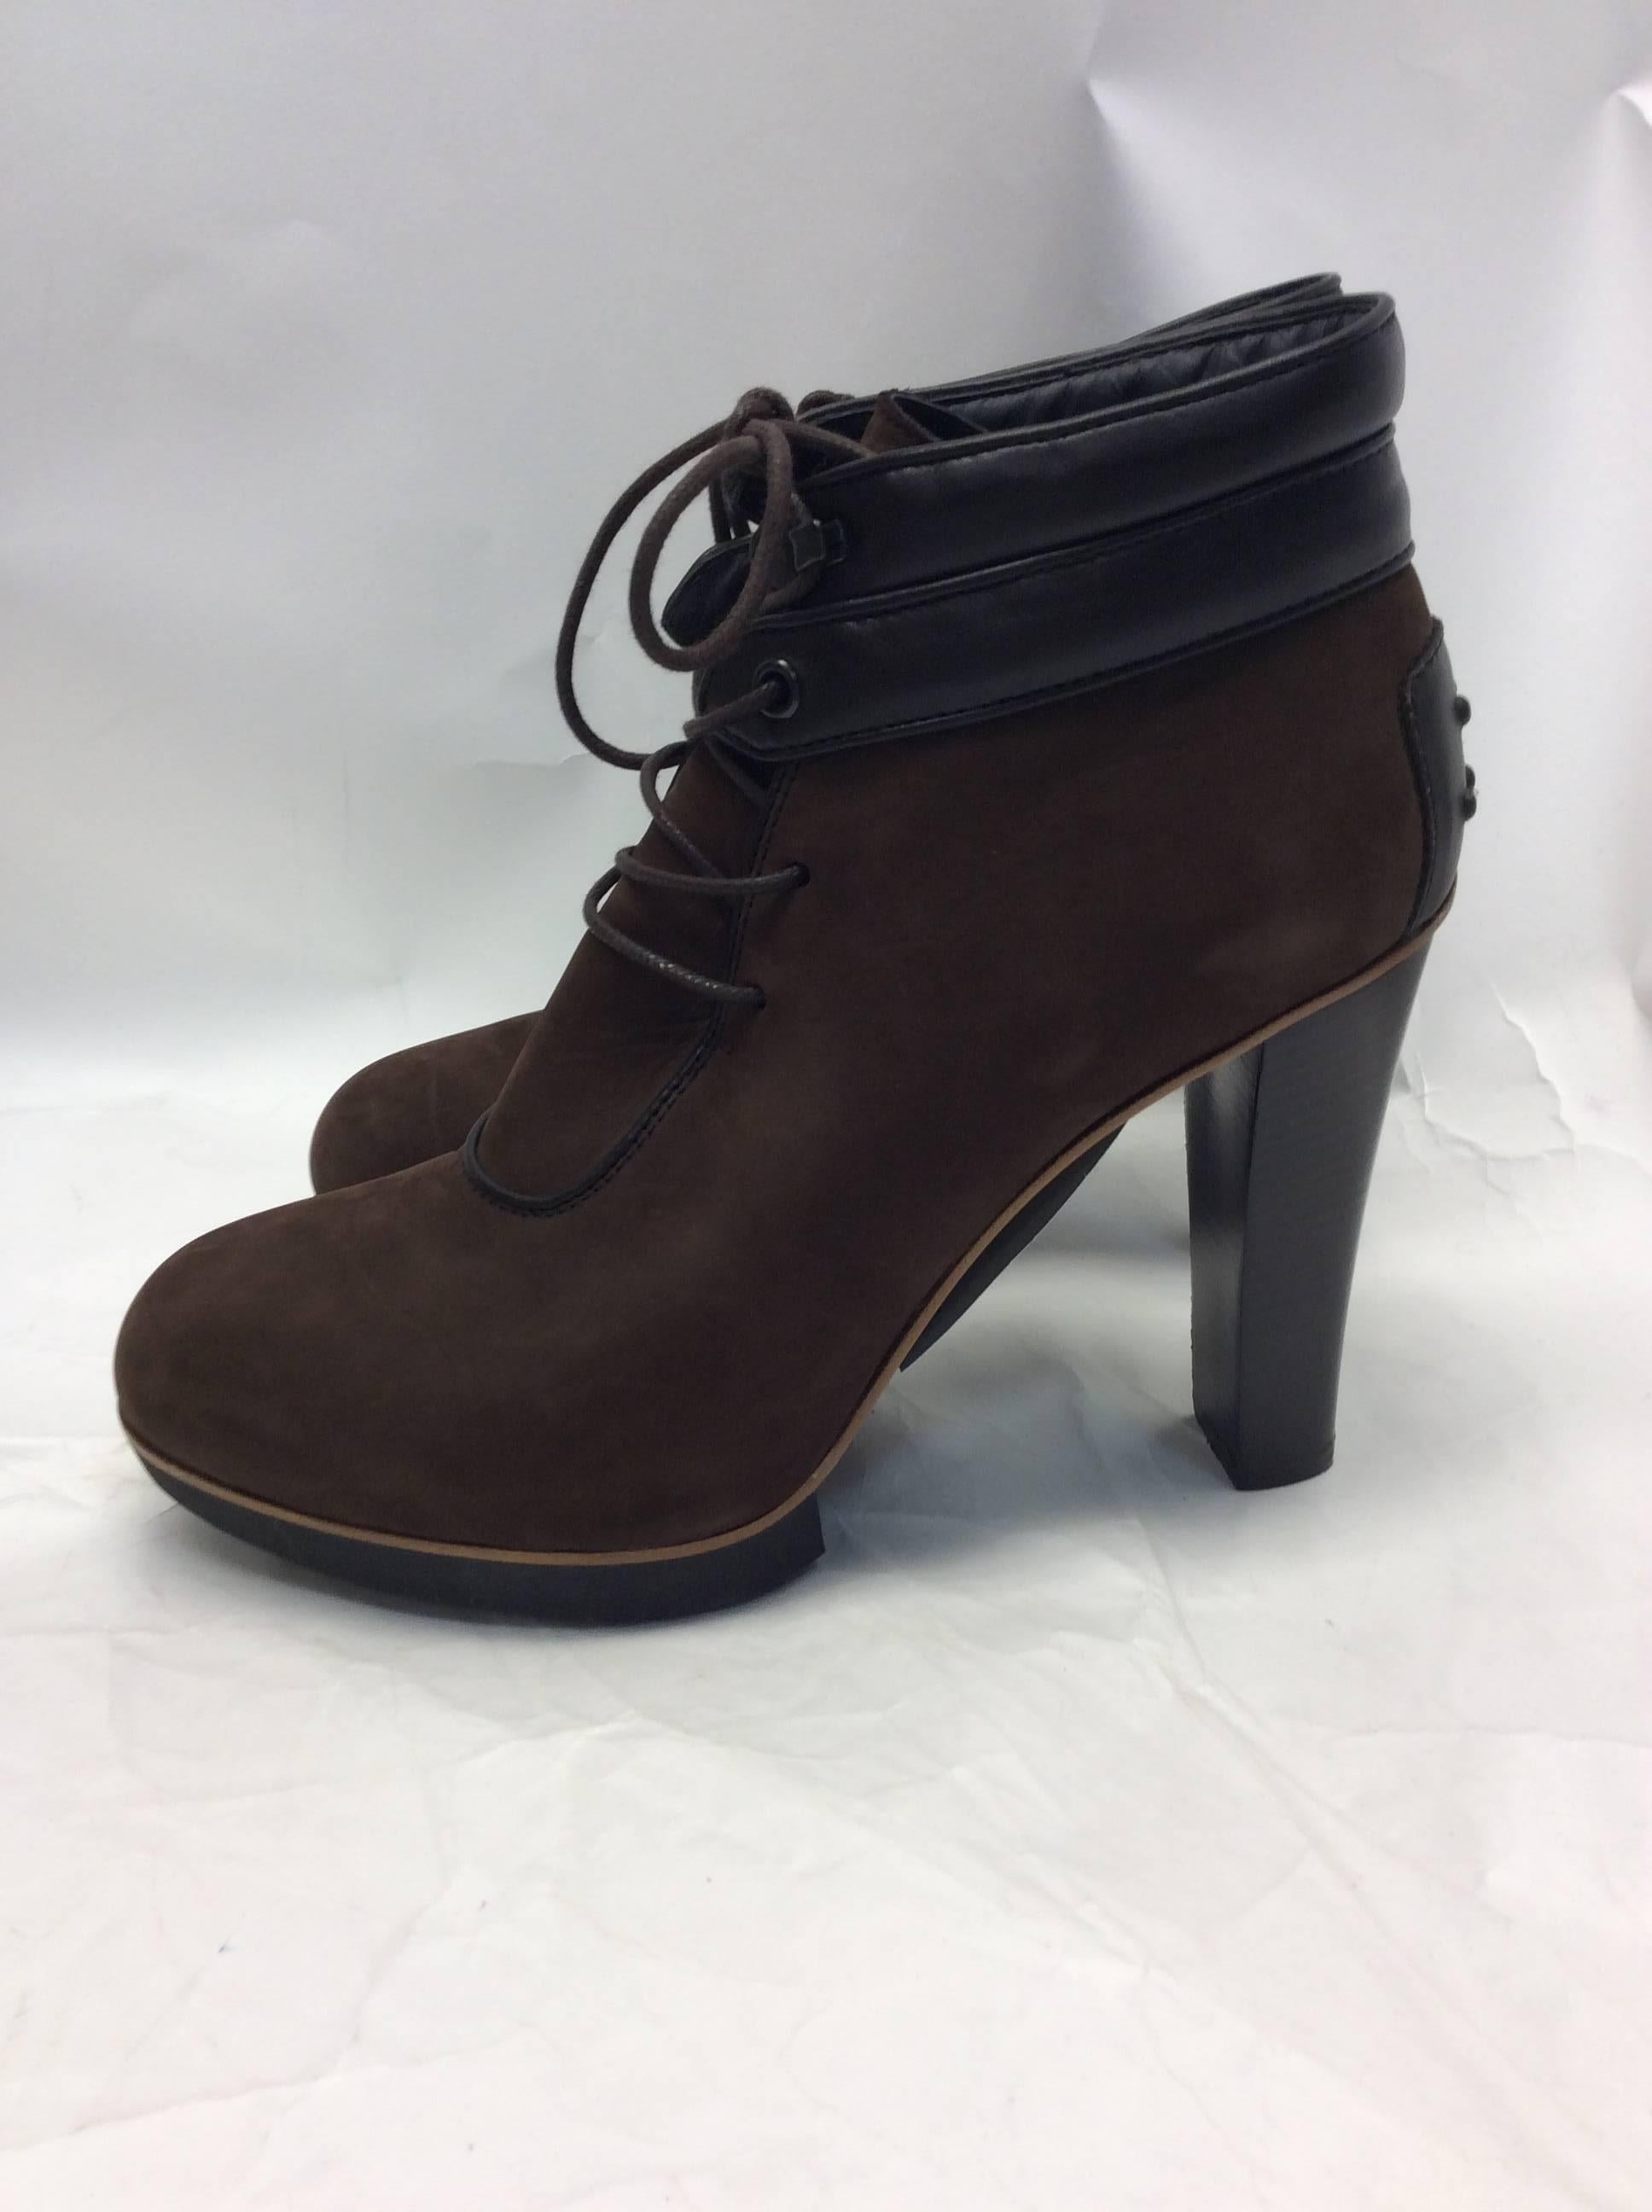 Tods Brown Lace Up Ankle Booties
Size 40
$299
4.5 inch heel, .5 inch platform
